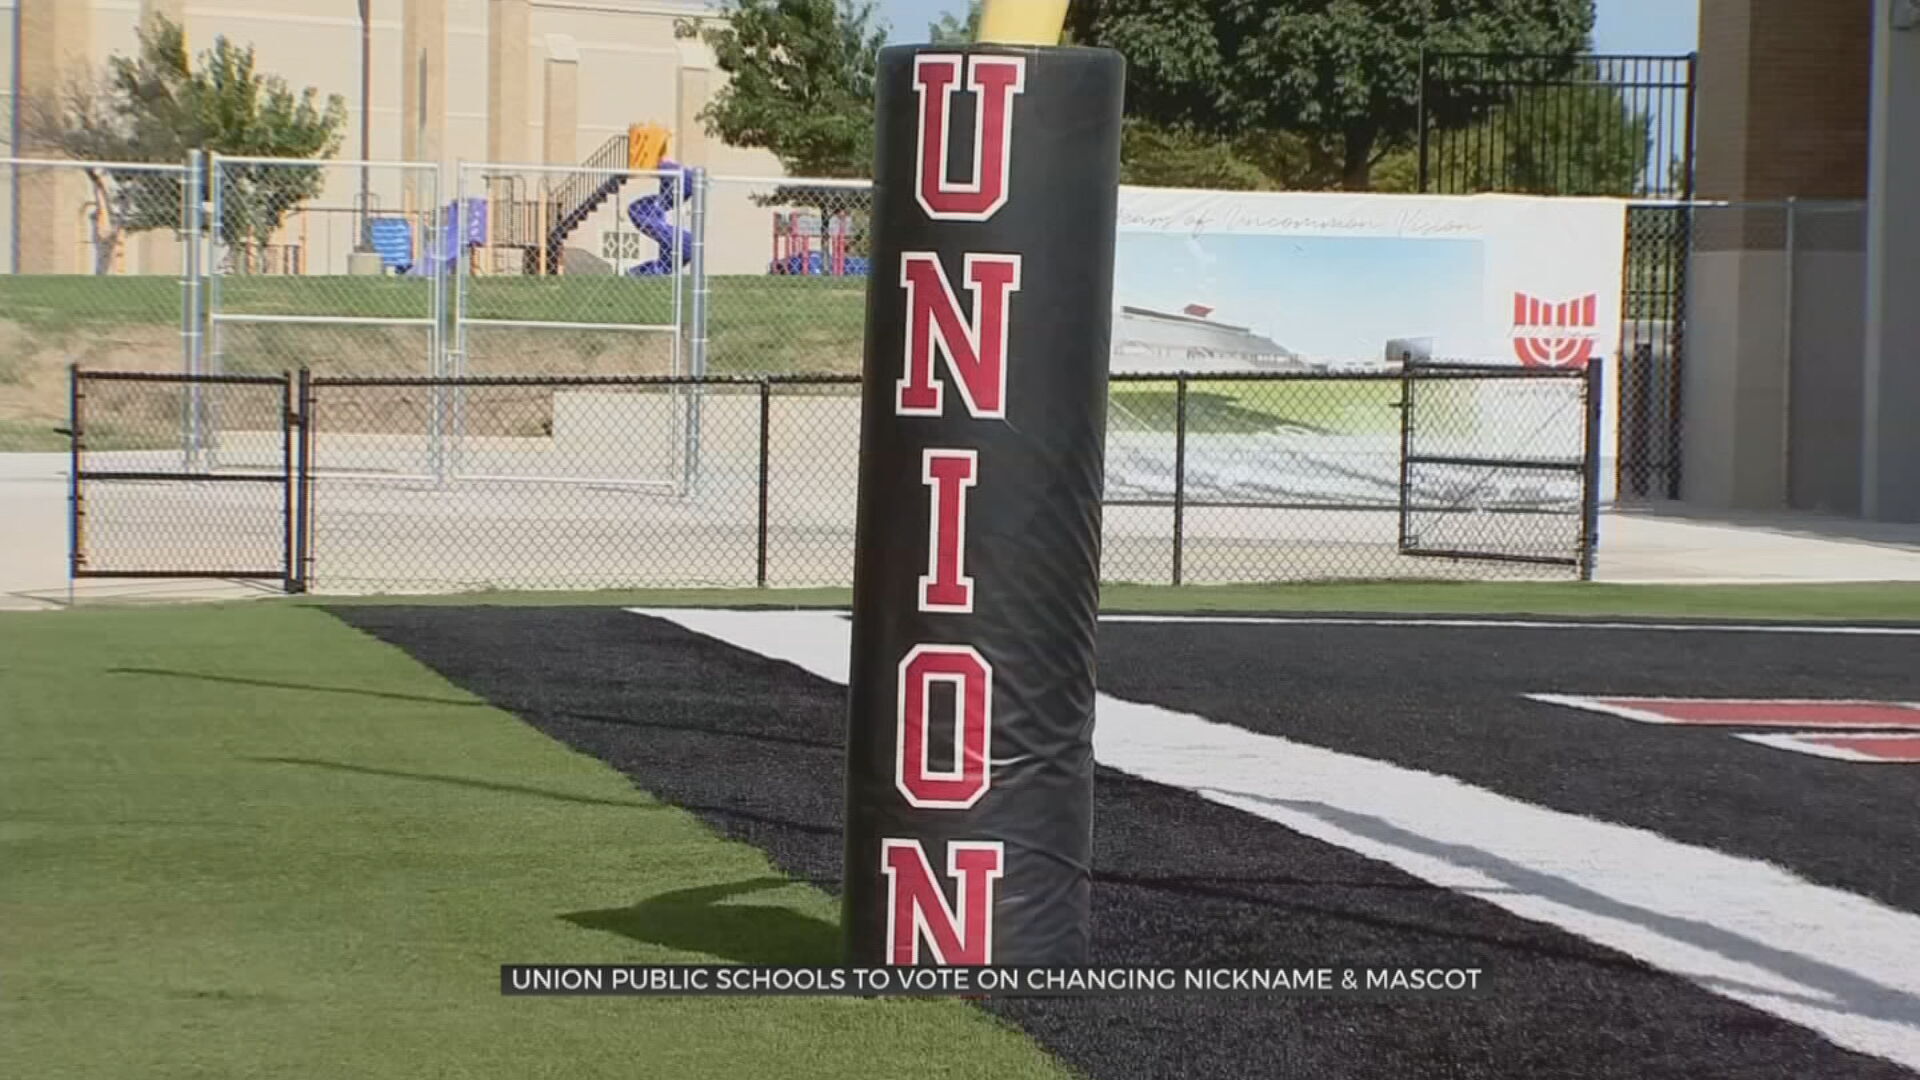 Union Public Schools To Vote On Changing Nickname, Mascot 